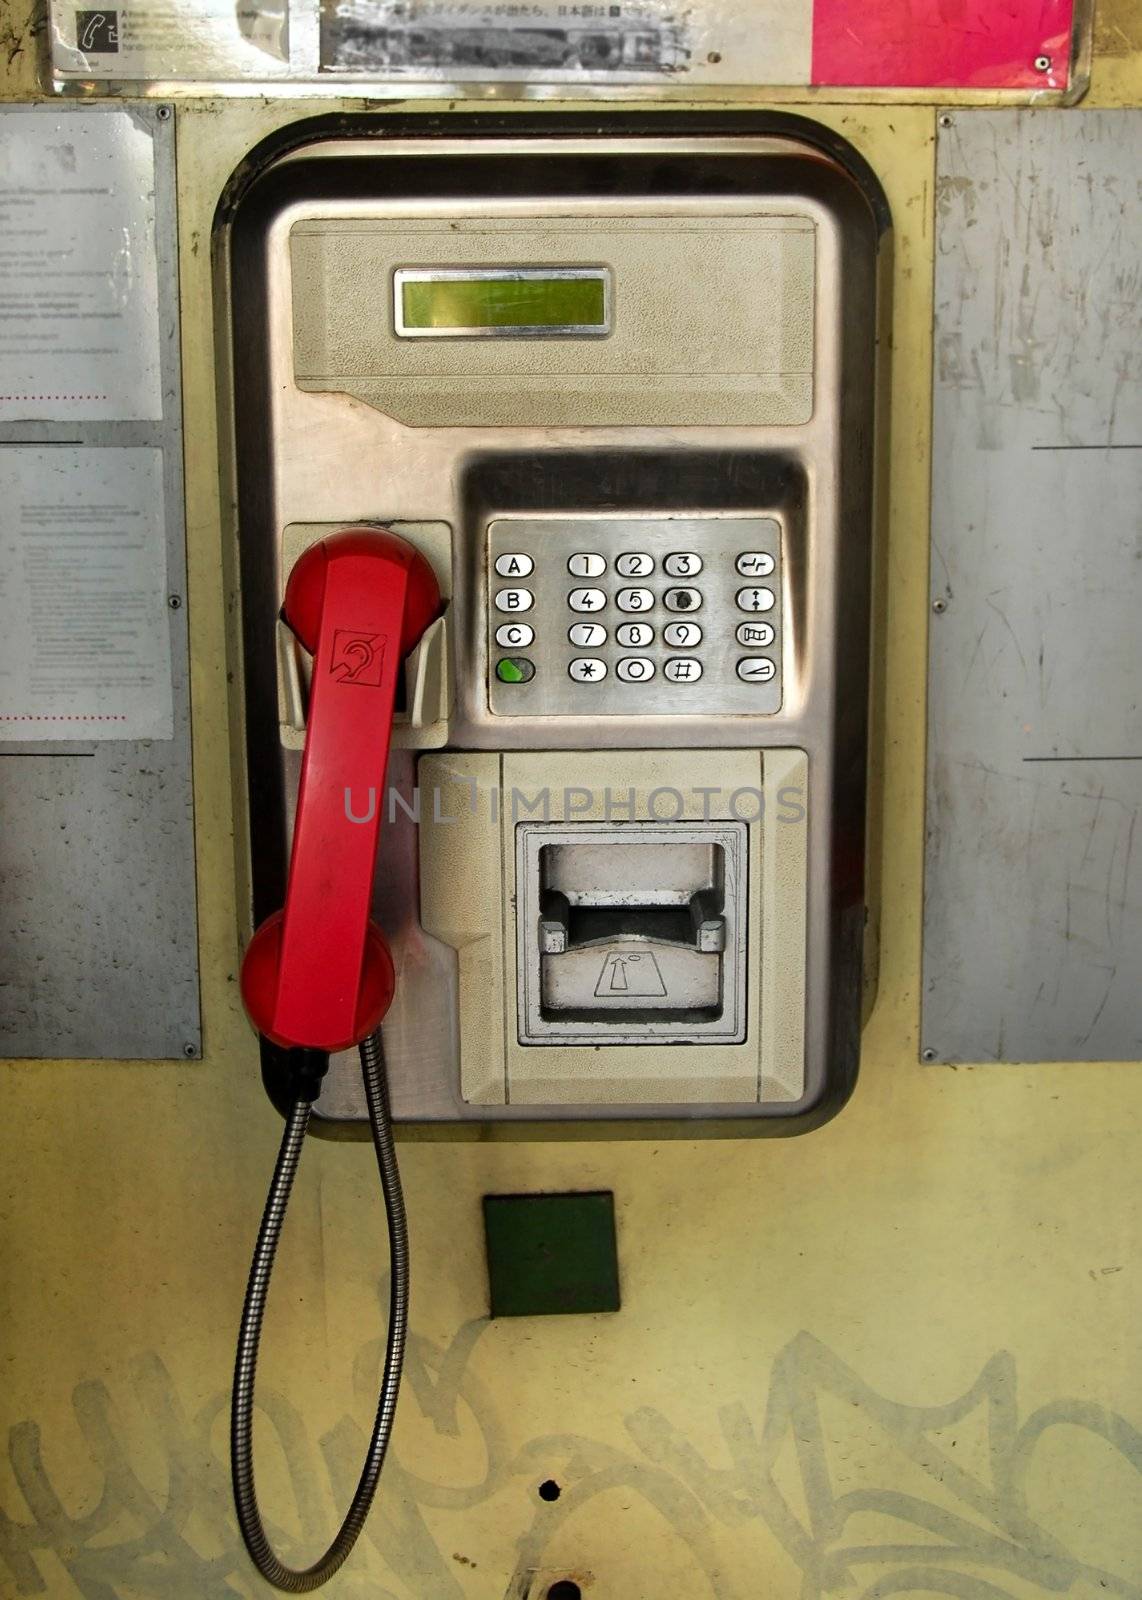 Public telephone by simply